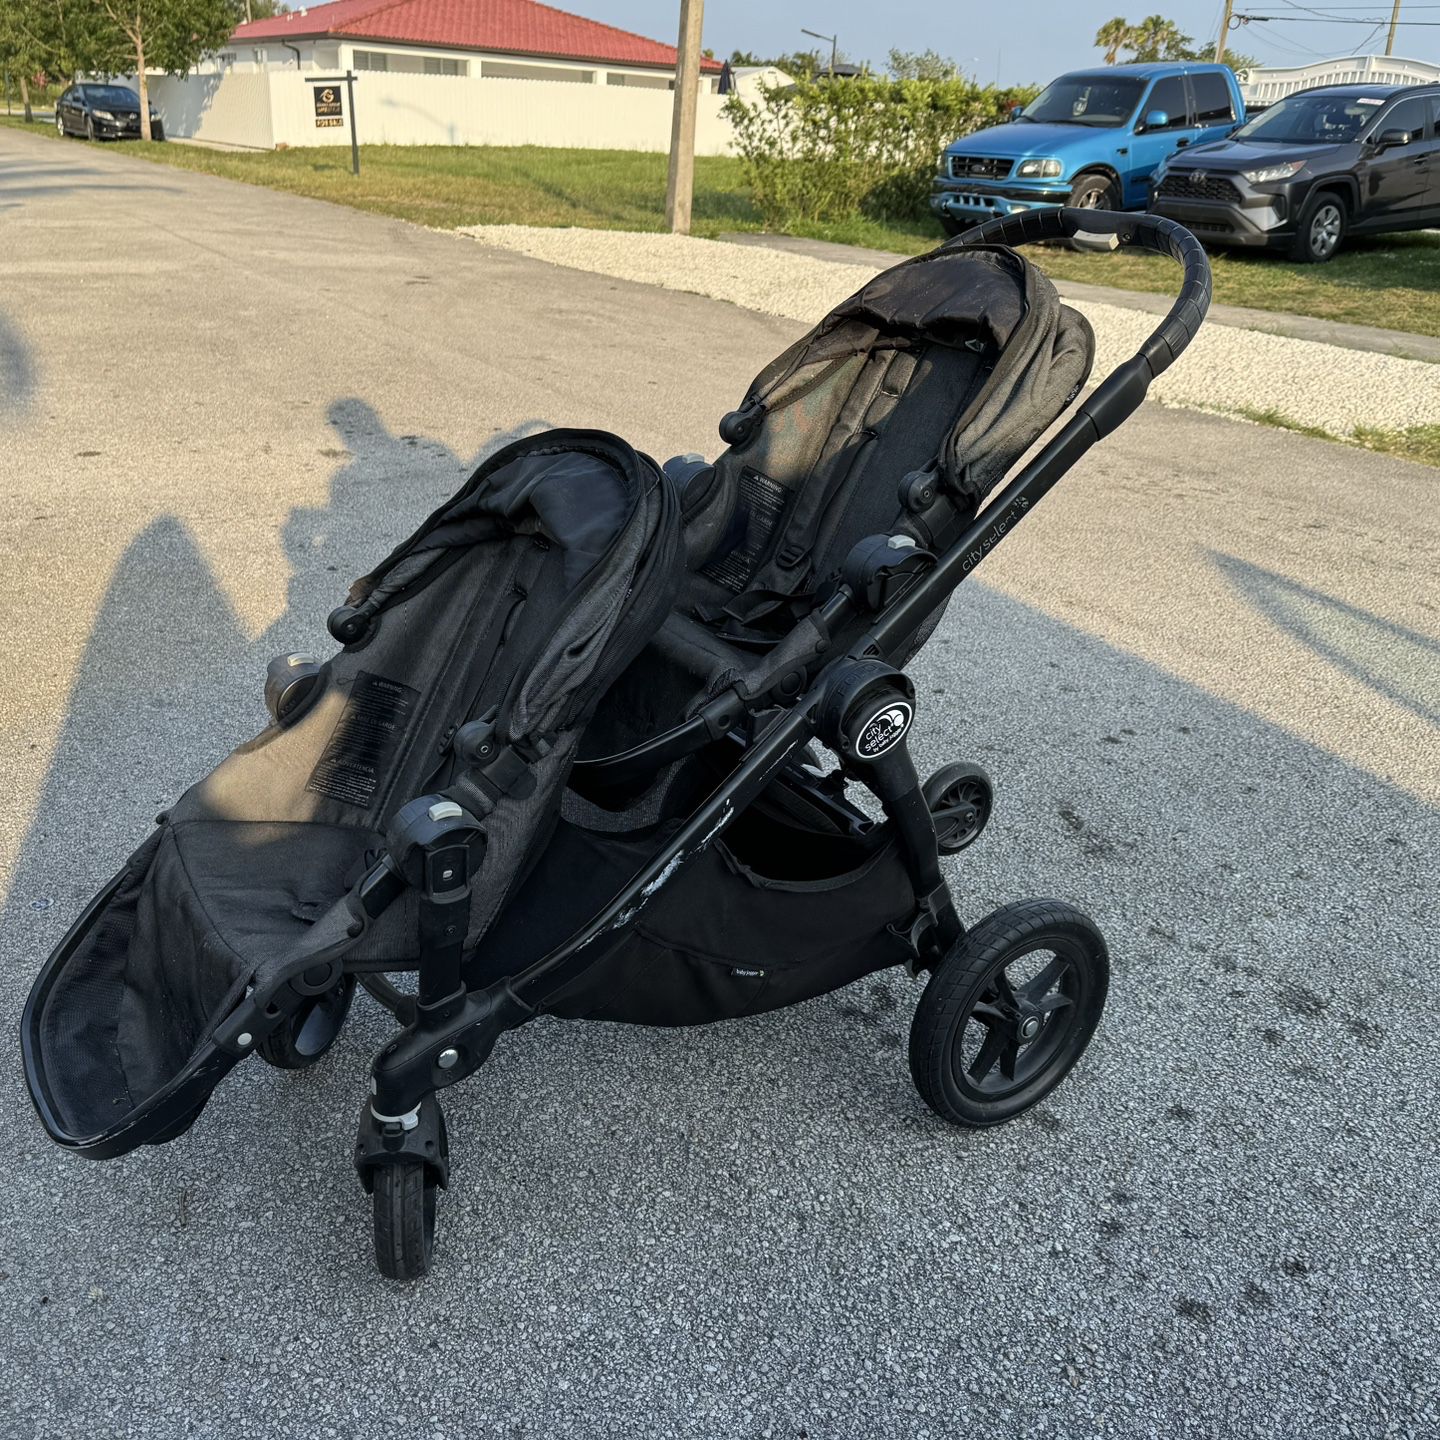 City Select By Baby Jogger